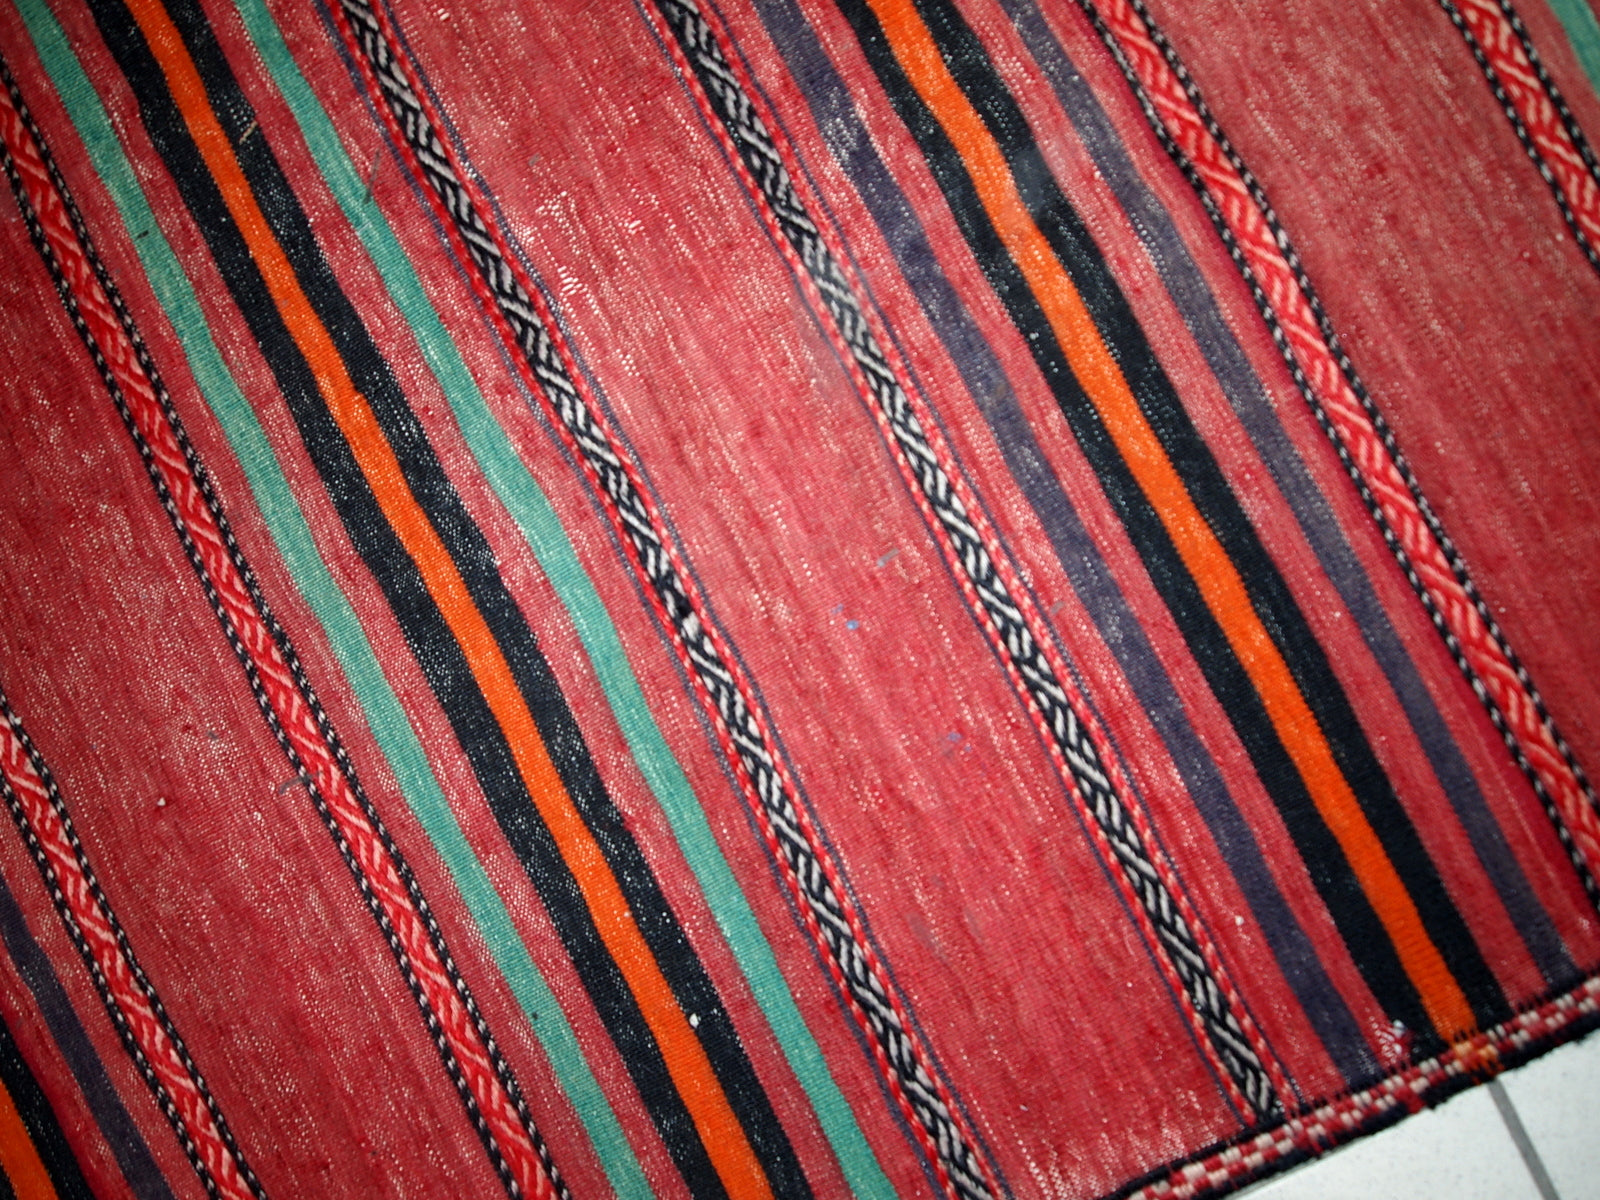 Handmade vintage Persian kilim in red shade with stripes. This kilim is in original condition, has some signs of age.